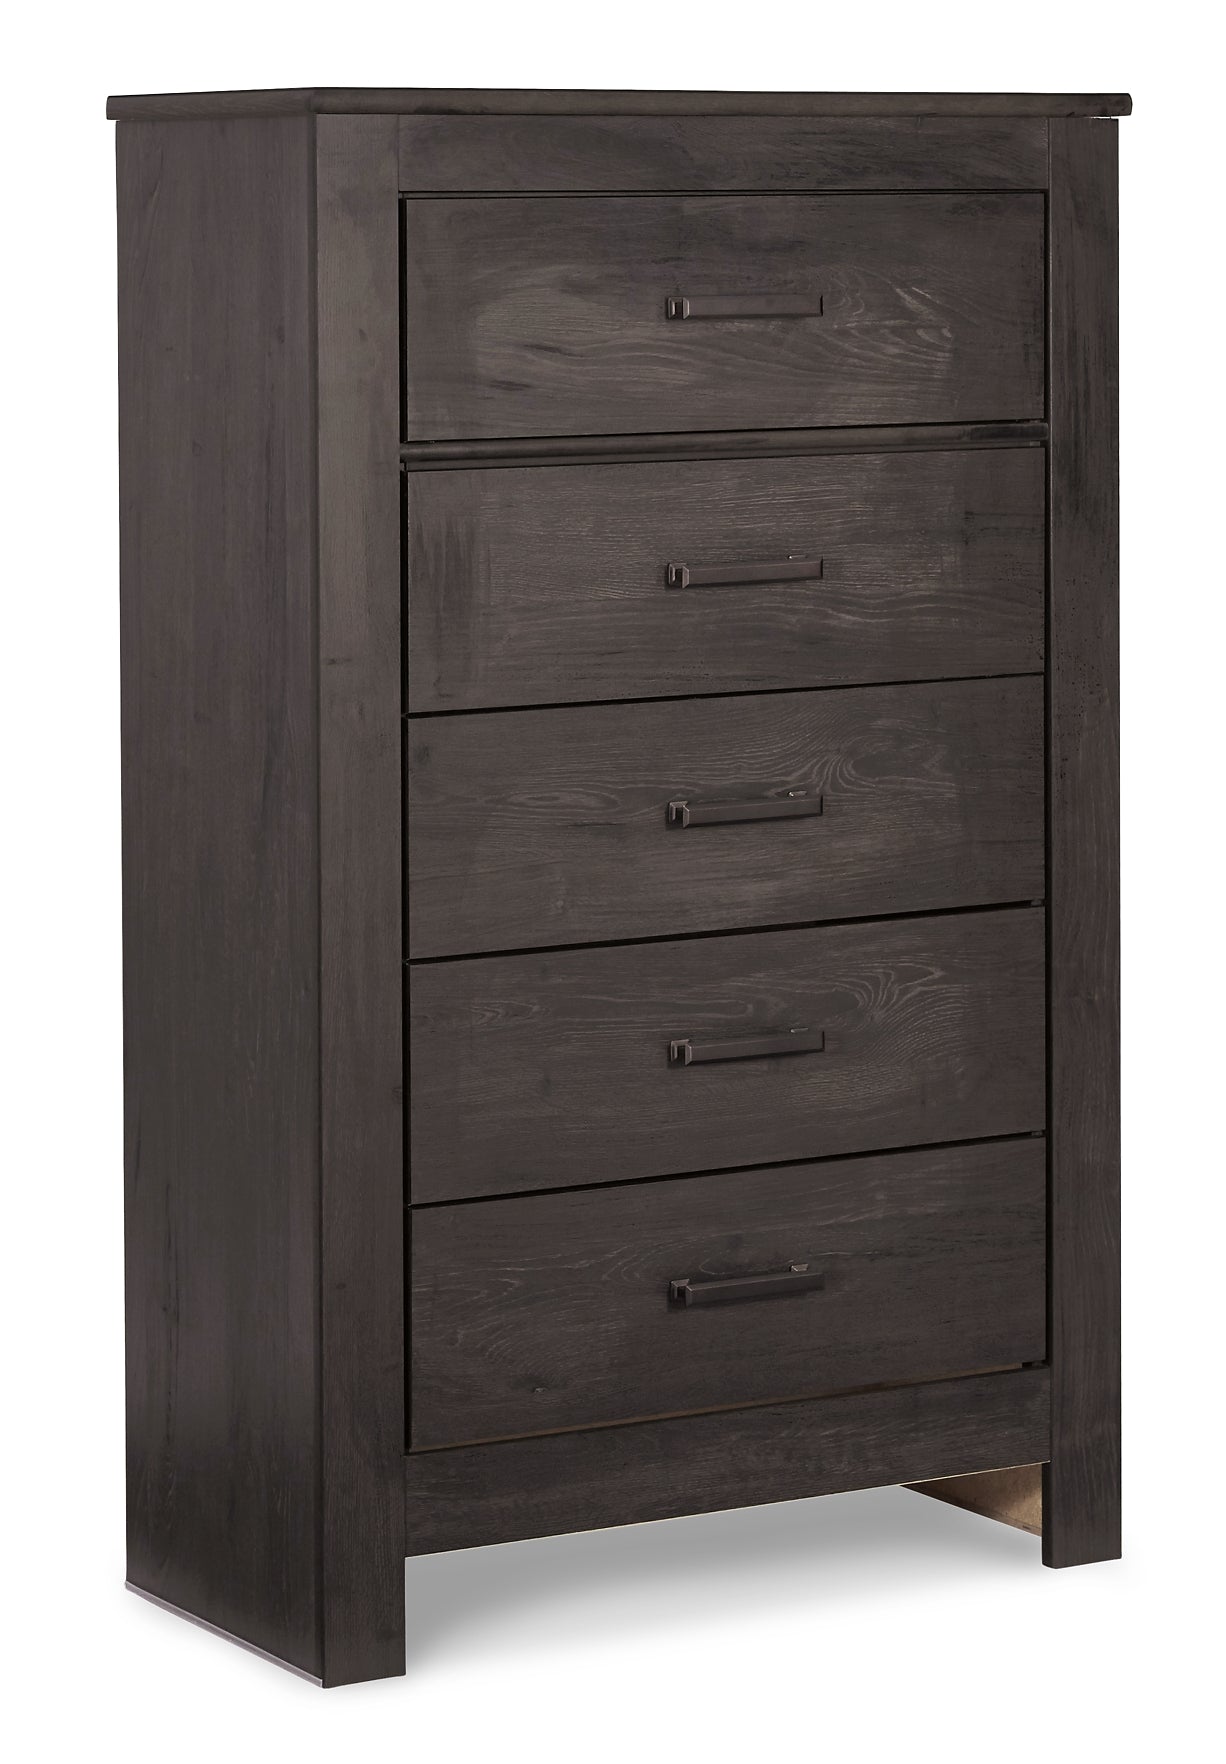 Brinxton Full Panel Bed with Mirrored Dresser, Chest and Nightstand